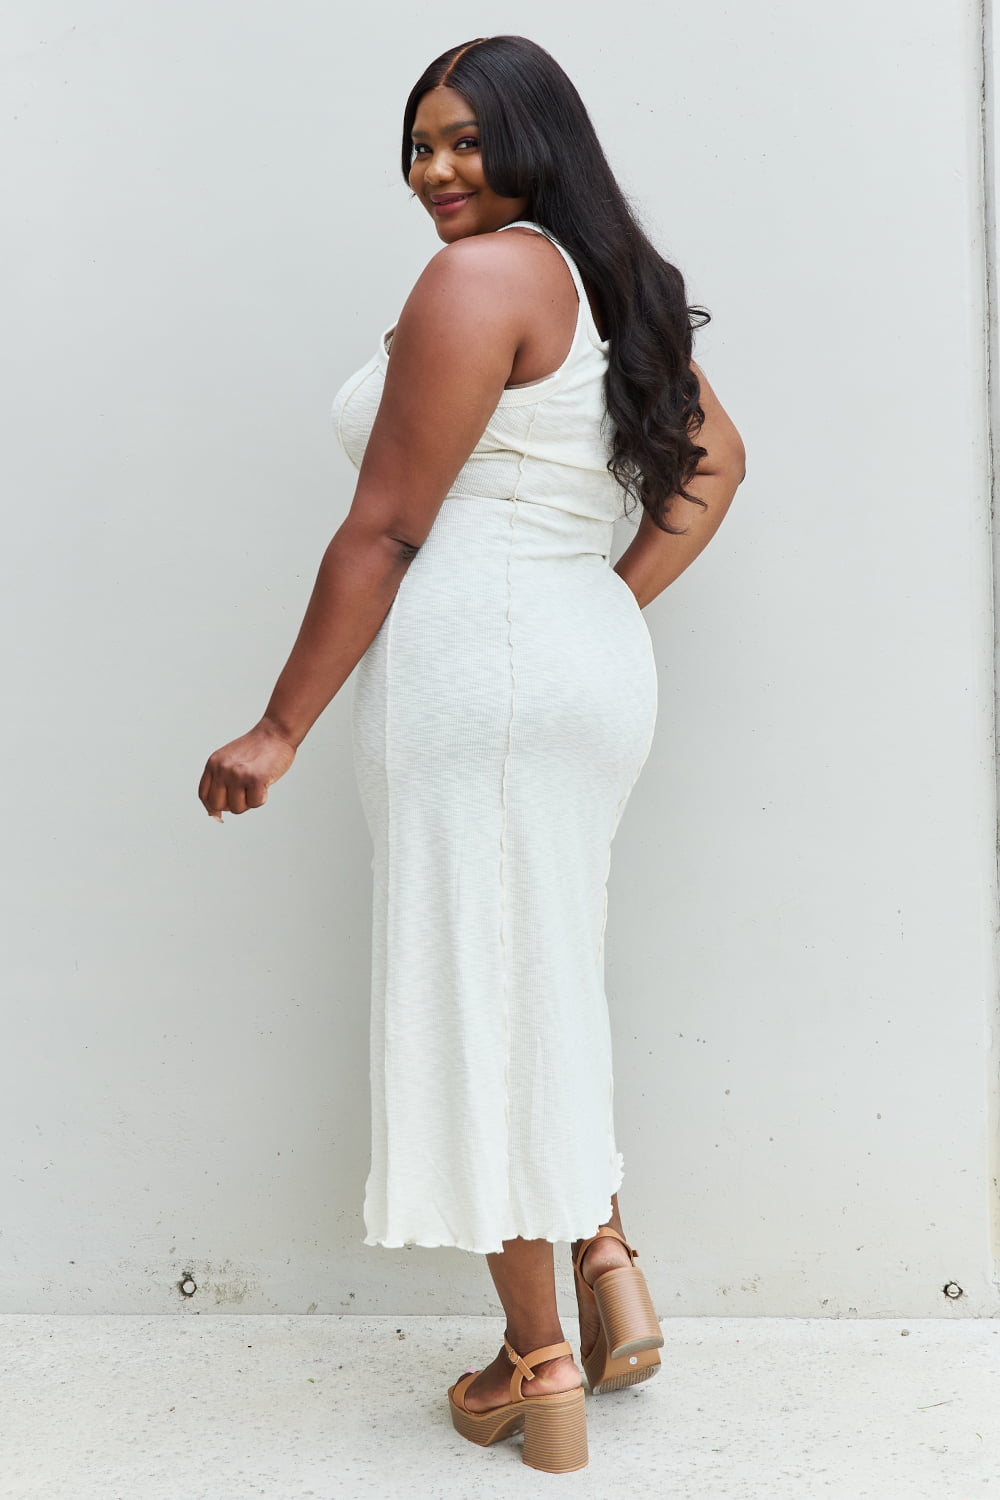 Look At Me Full Size Notch Neck Maxi Dress with Slit in Ivory